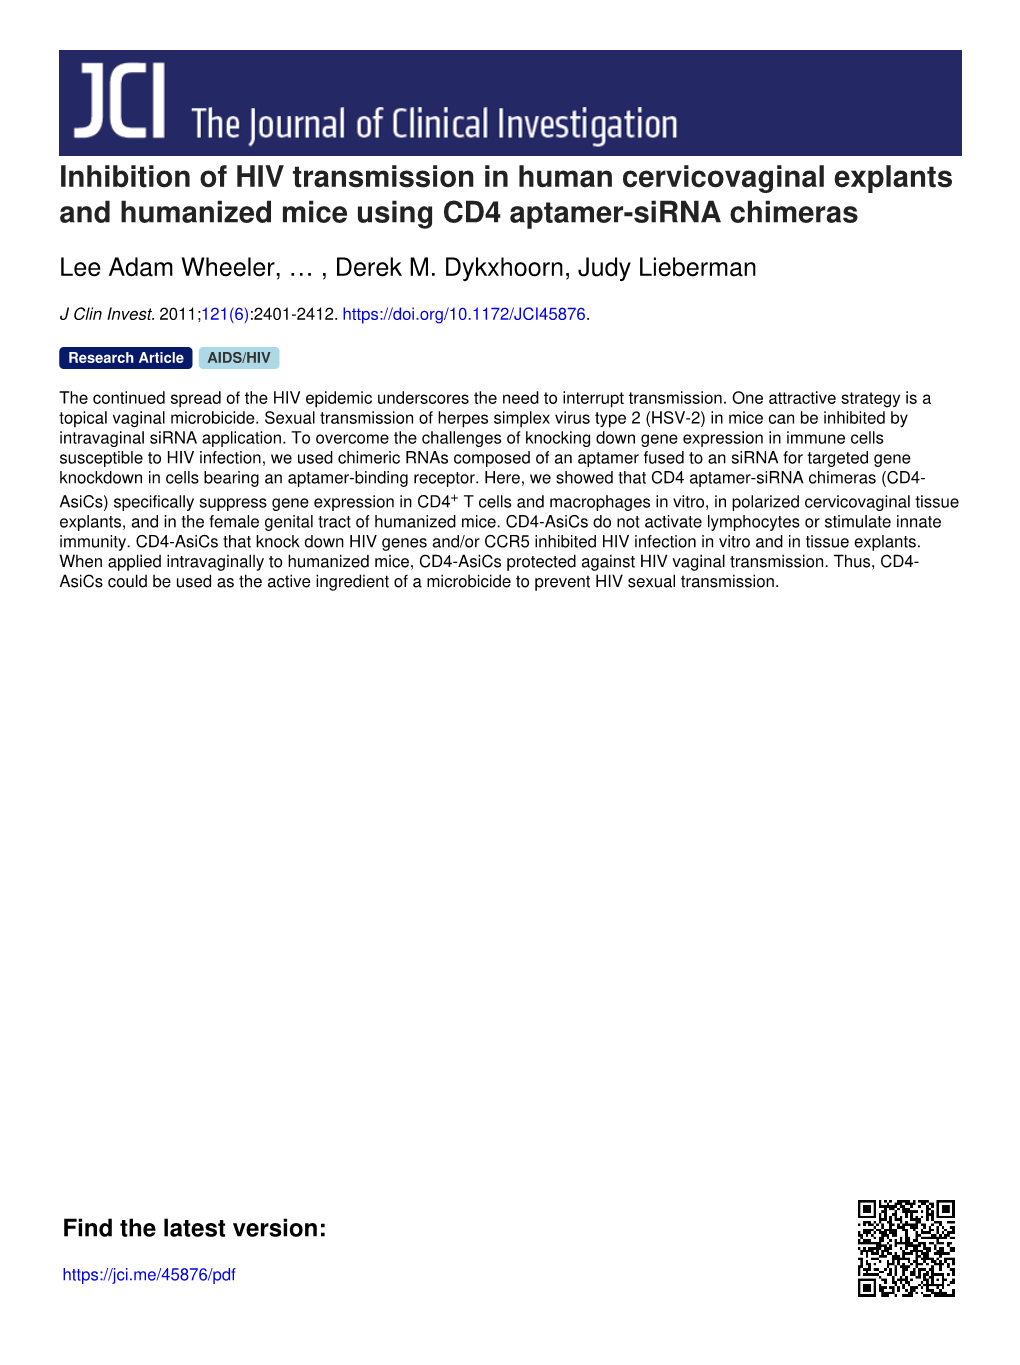 Inhibition of HIV Transmission in Human Cervicovaginal Explants and Humanized Mice Using CD4 Aptamer-Sirna Chimeras